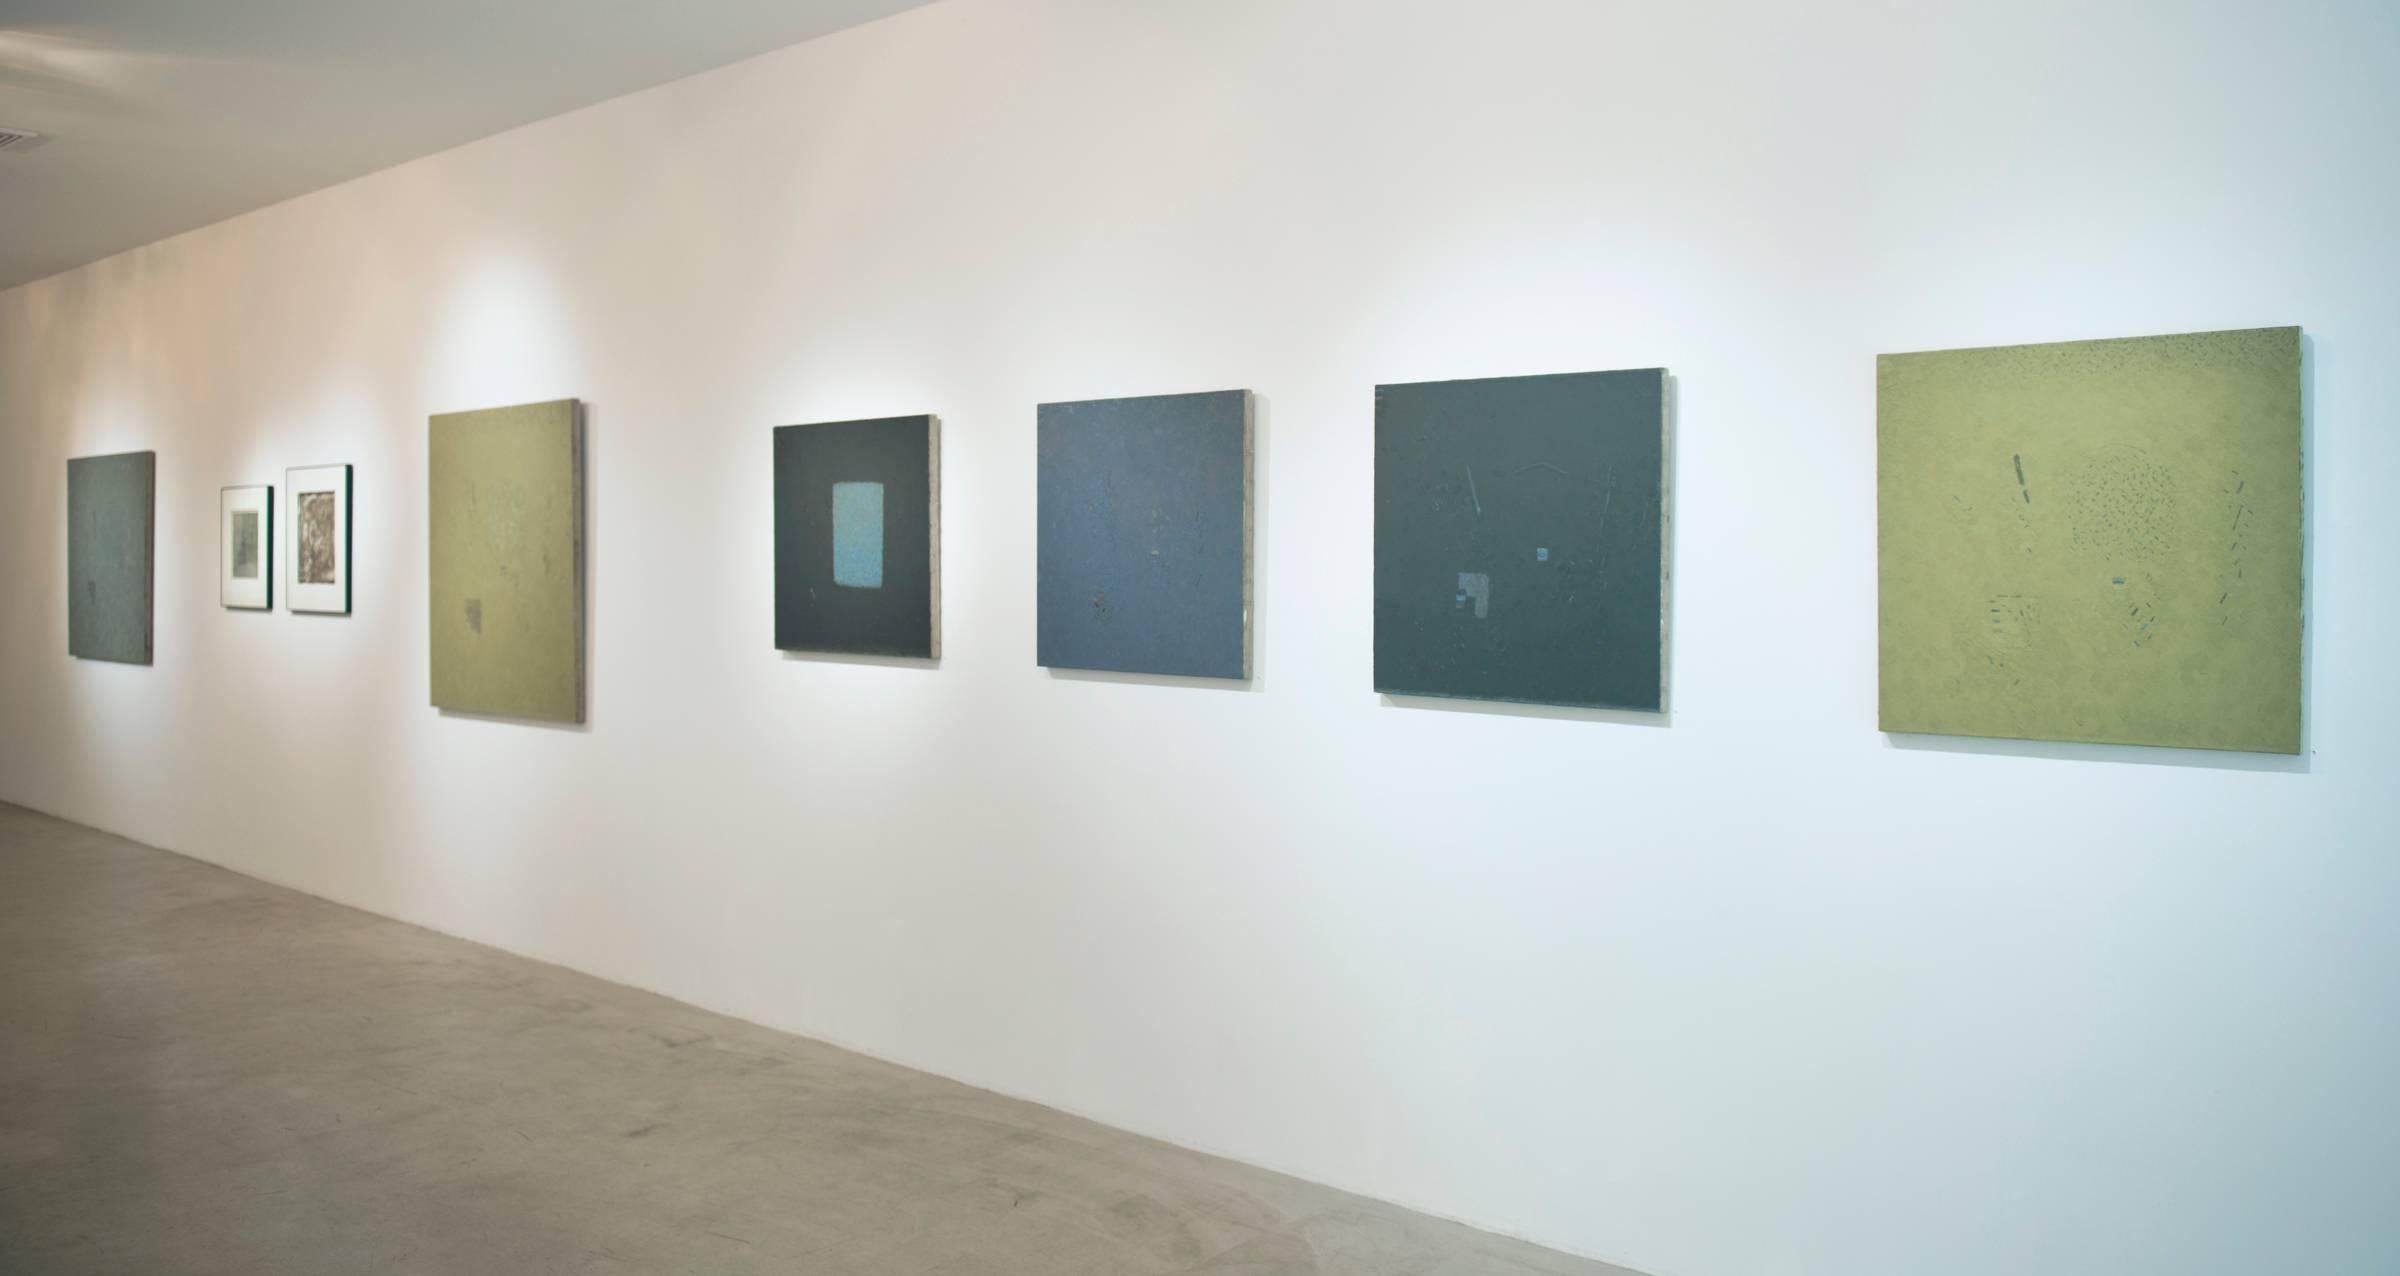 Riley Brewster writes “my paintings most often employ an initiating form, which operates spatially, metaphorically and structurally as a threshold space. It is a form that measures the painting space in terms of scale, point- of - view, and